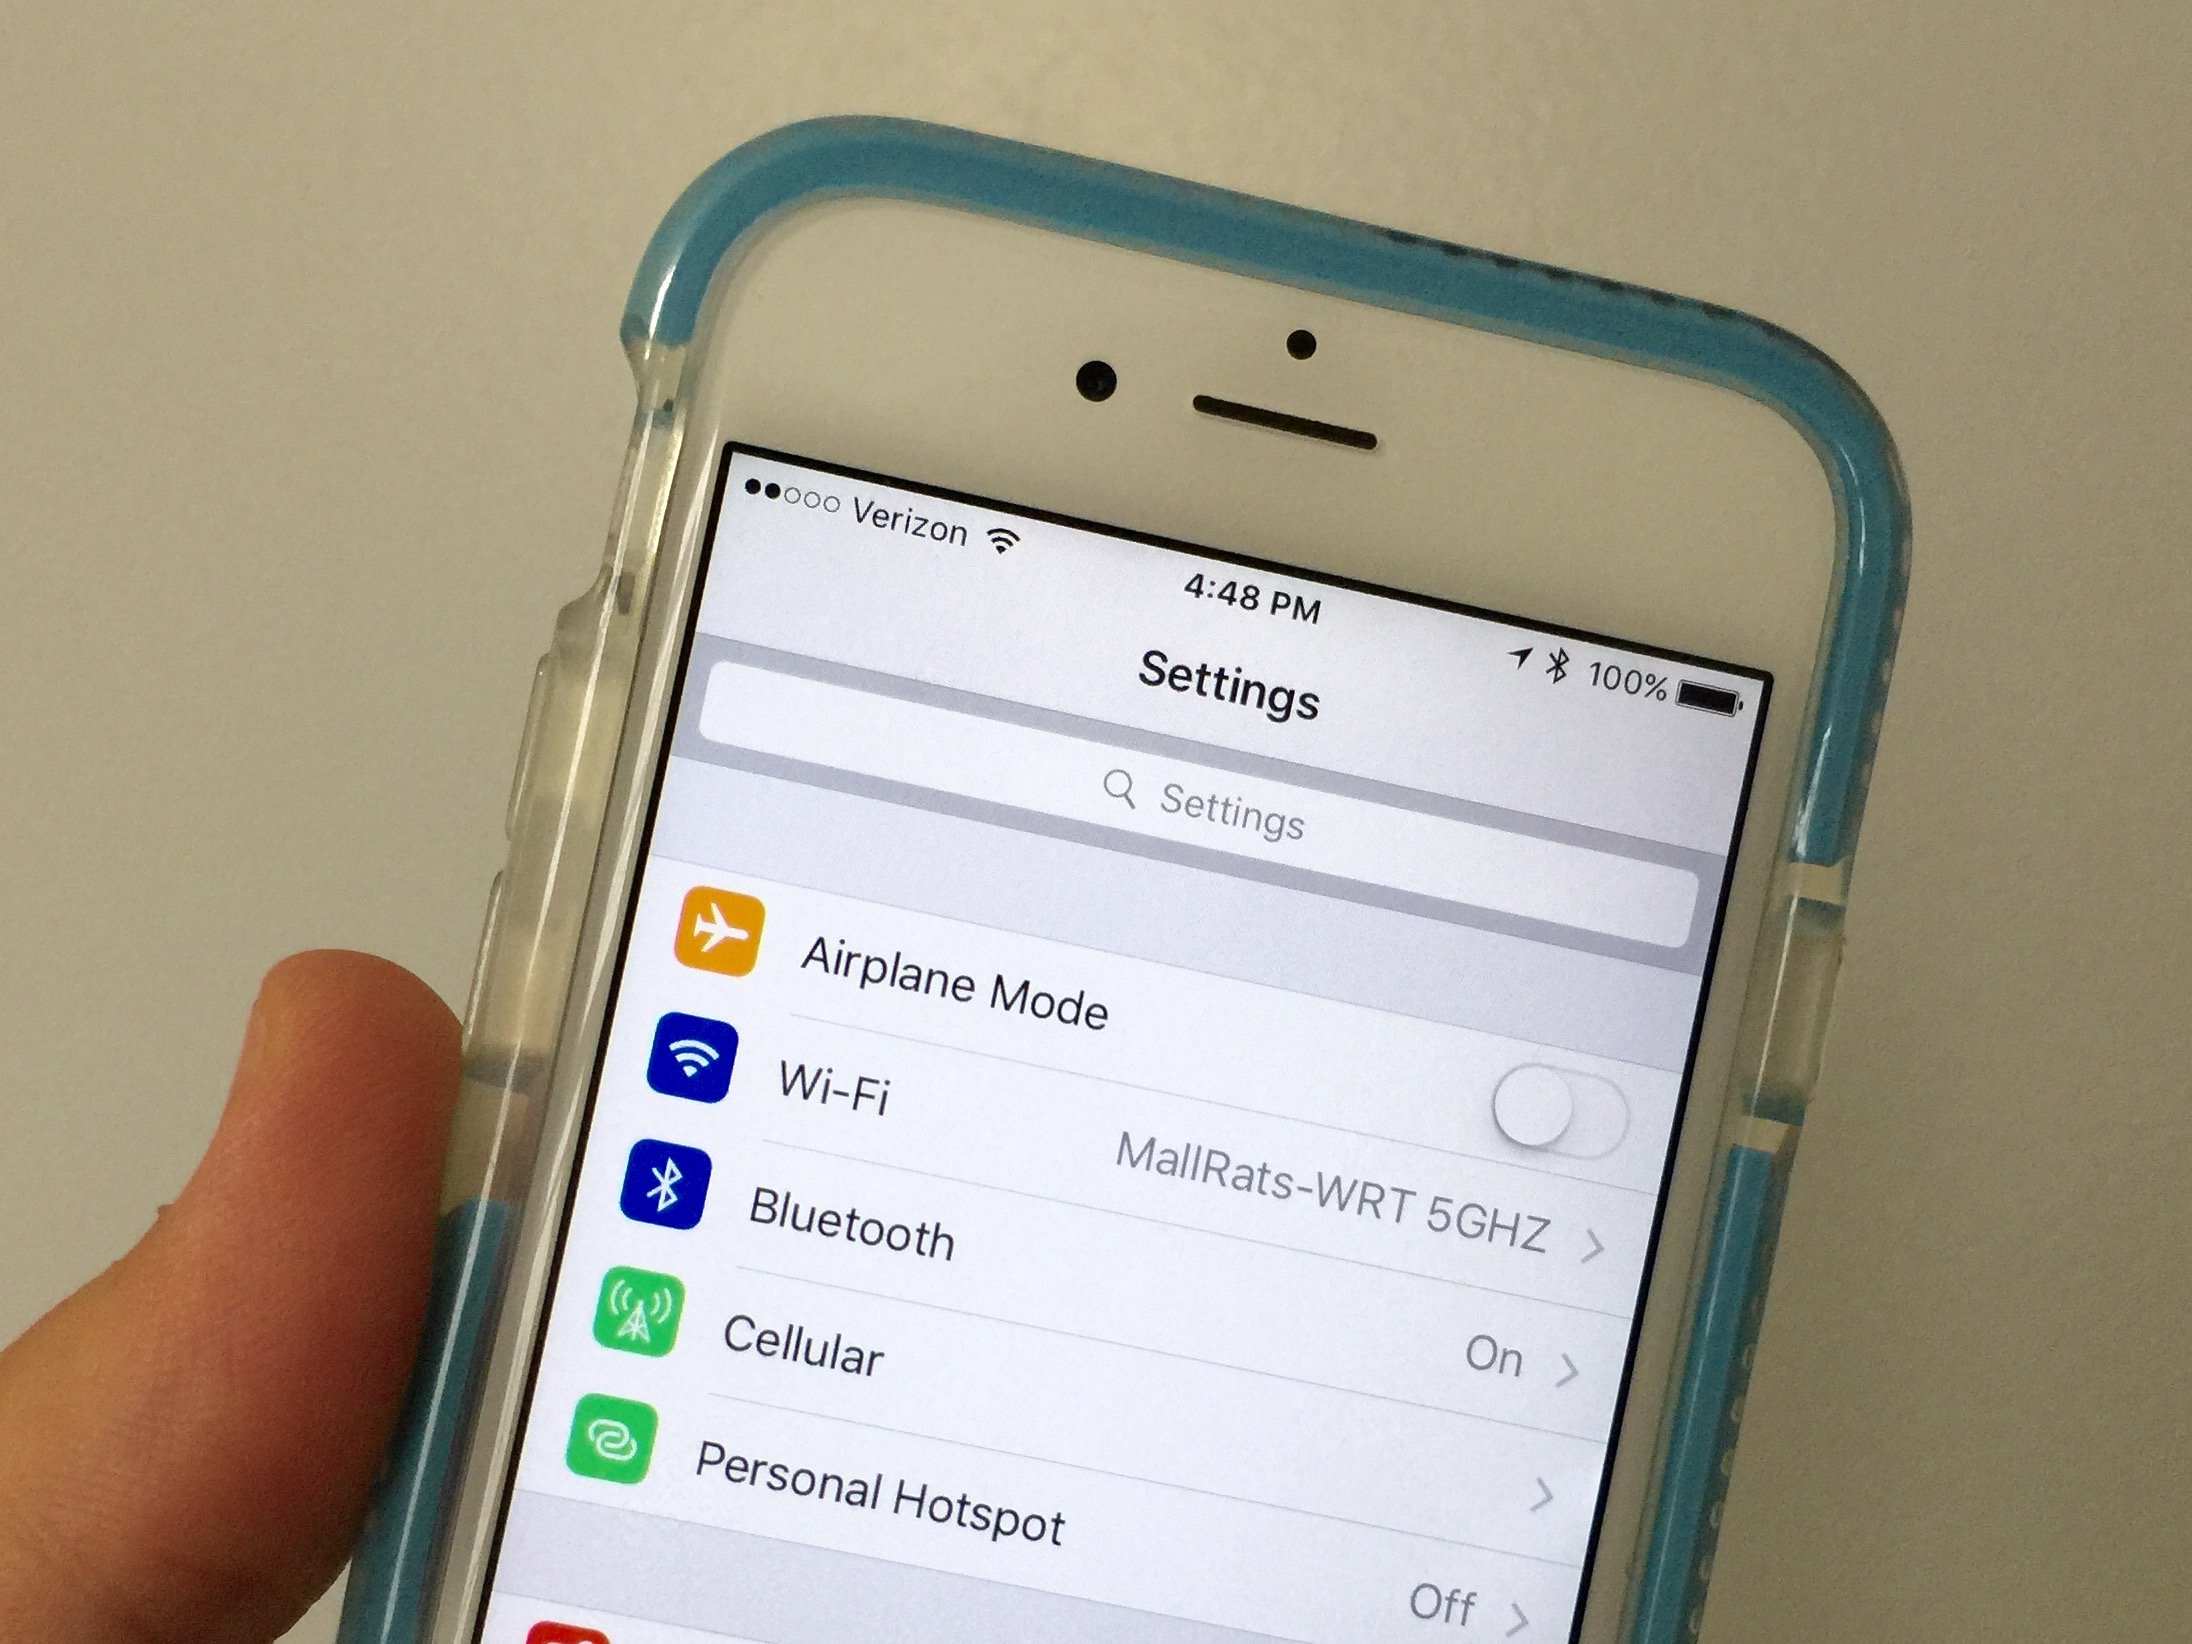 Here are the iOS 9 settings you need to change and check out.